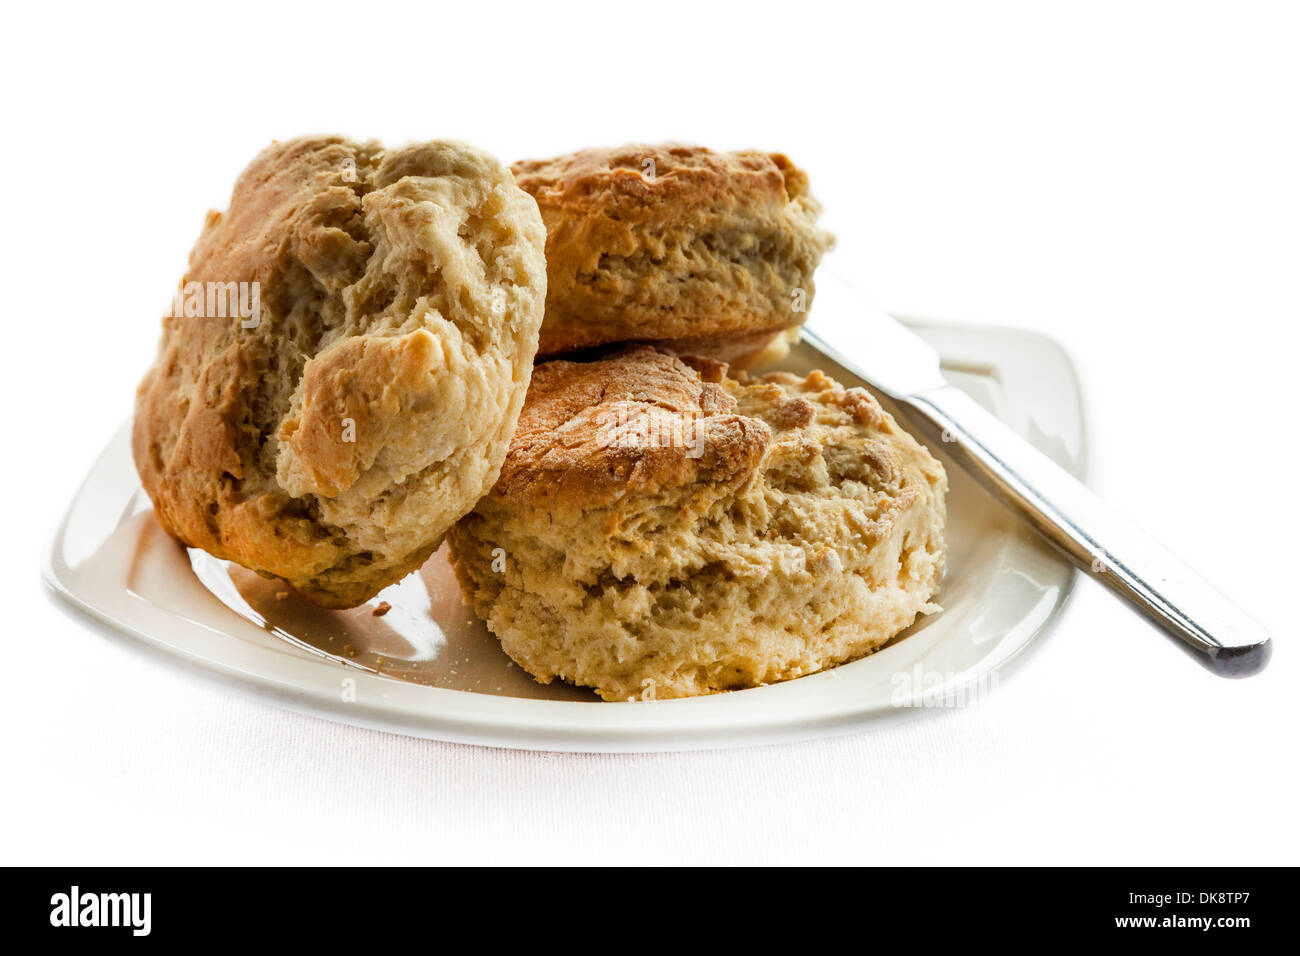 A plate with three homemade scones and a knife Stock Photo